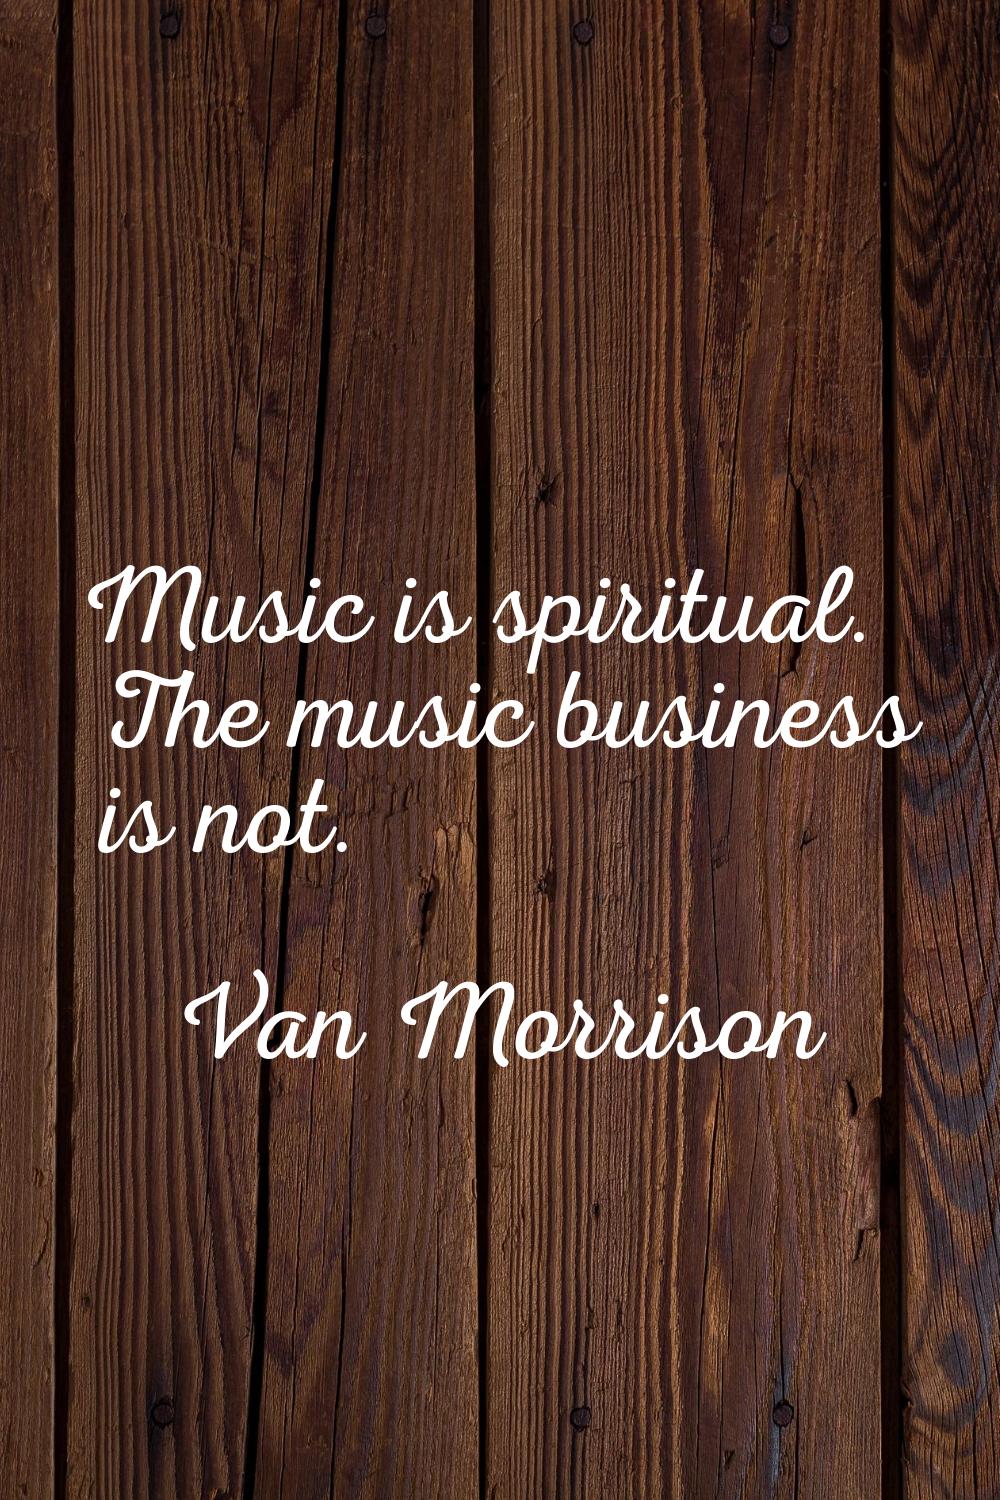 Music is spiritual. The music business is not.